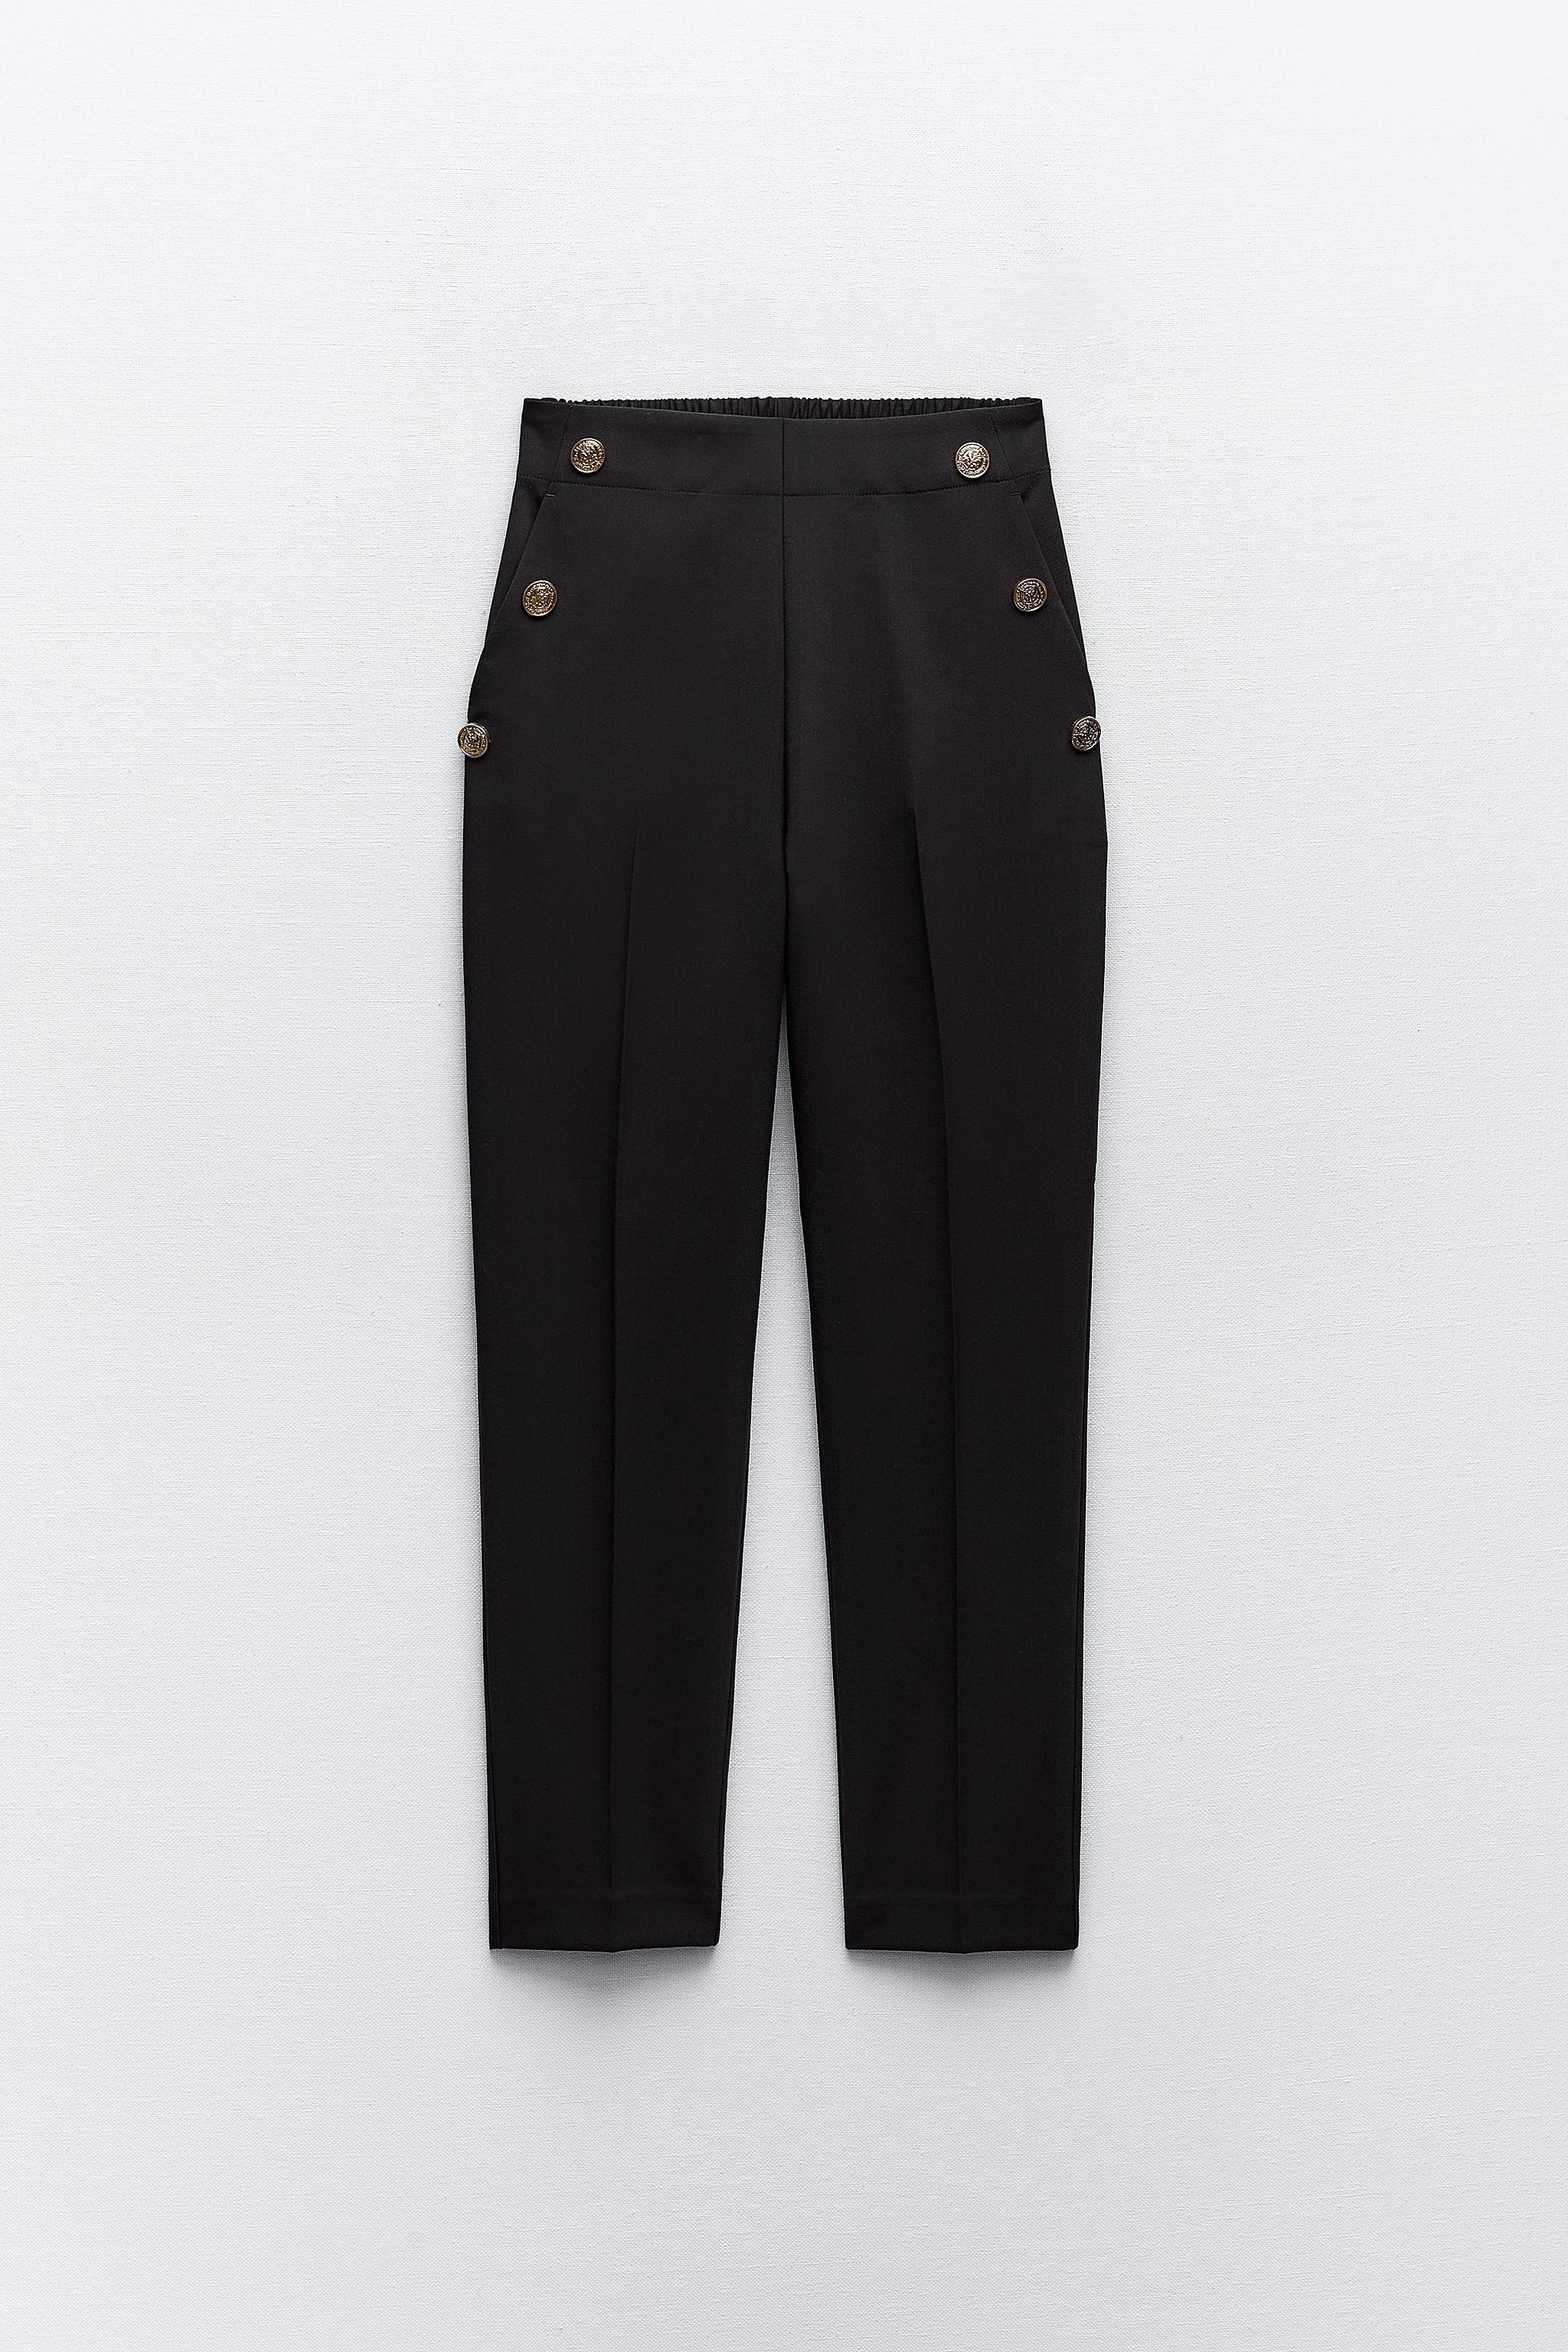 Trafaluc by Zara Women's Pants On Sale Up To 90% Off Retail